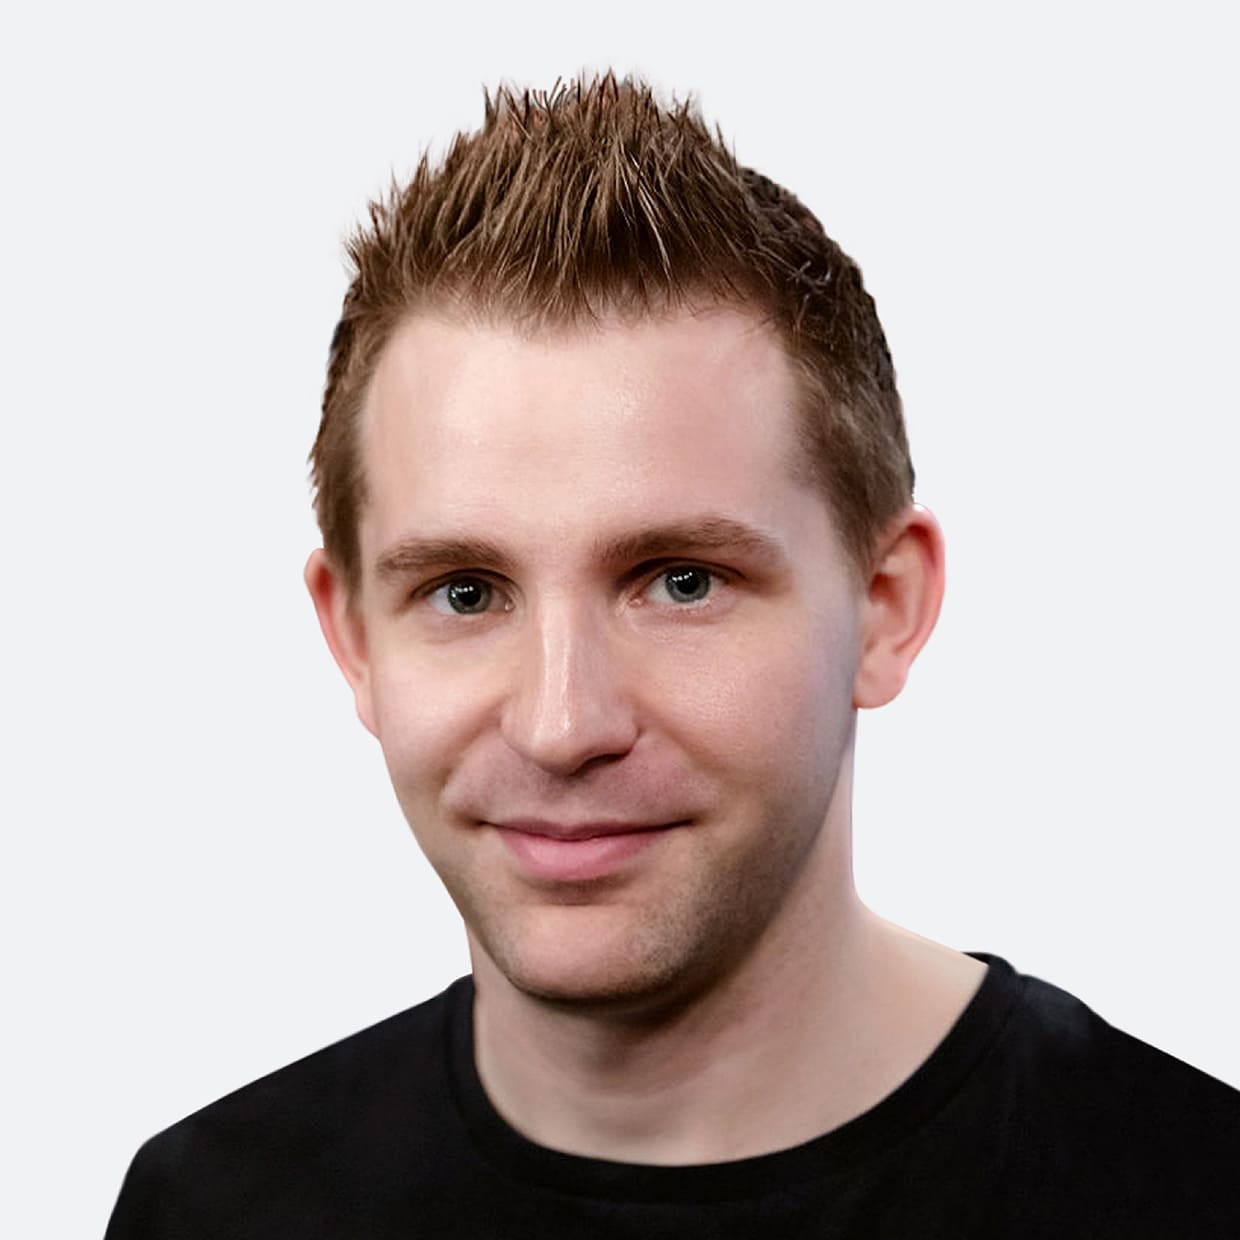 Internet Vikings - The new era of transferring data. Live with Max Schrems​ - Maximillian Schrems​